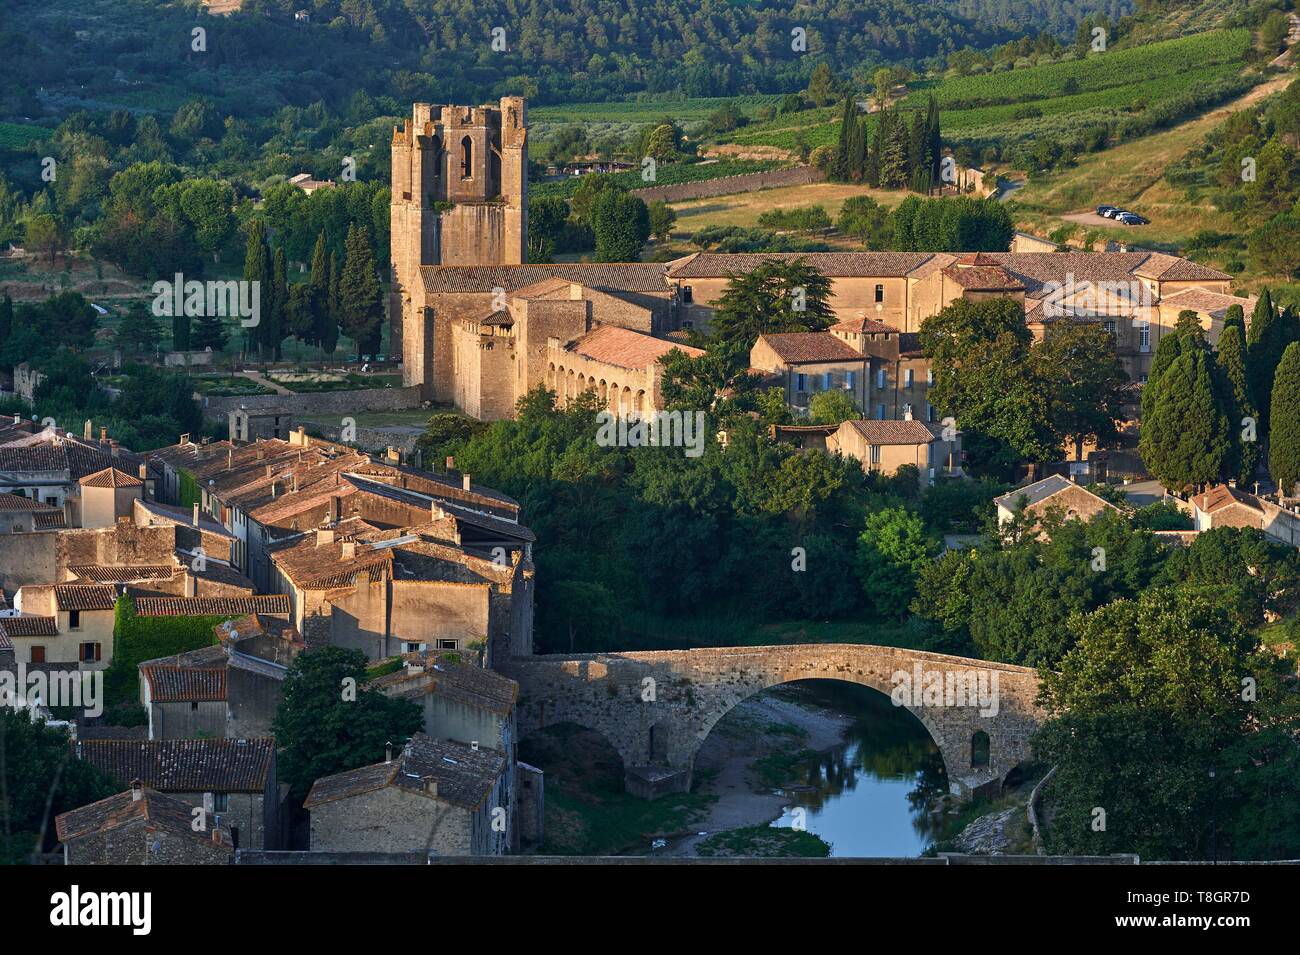 France, Aude, Lagrasse, The Most beautiful Villages of France, medival city, the Lagrasse abbey and the old bridge Stock Photo